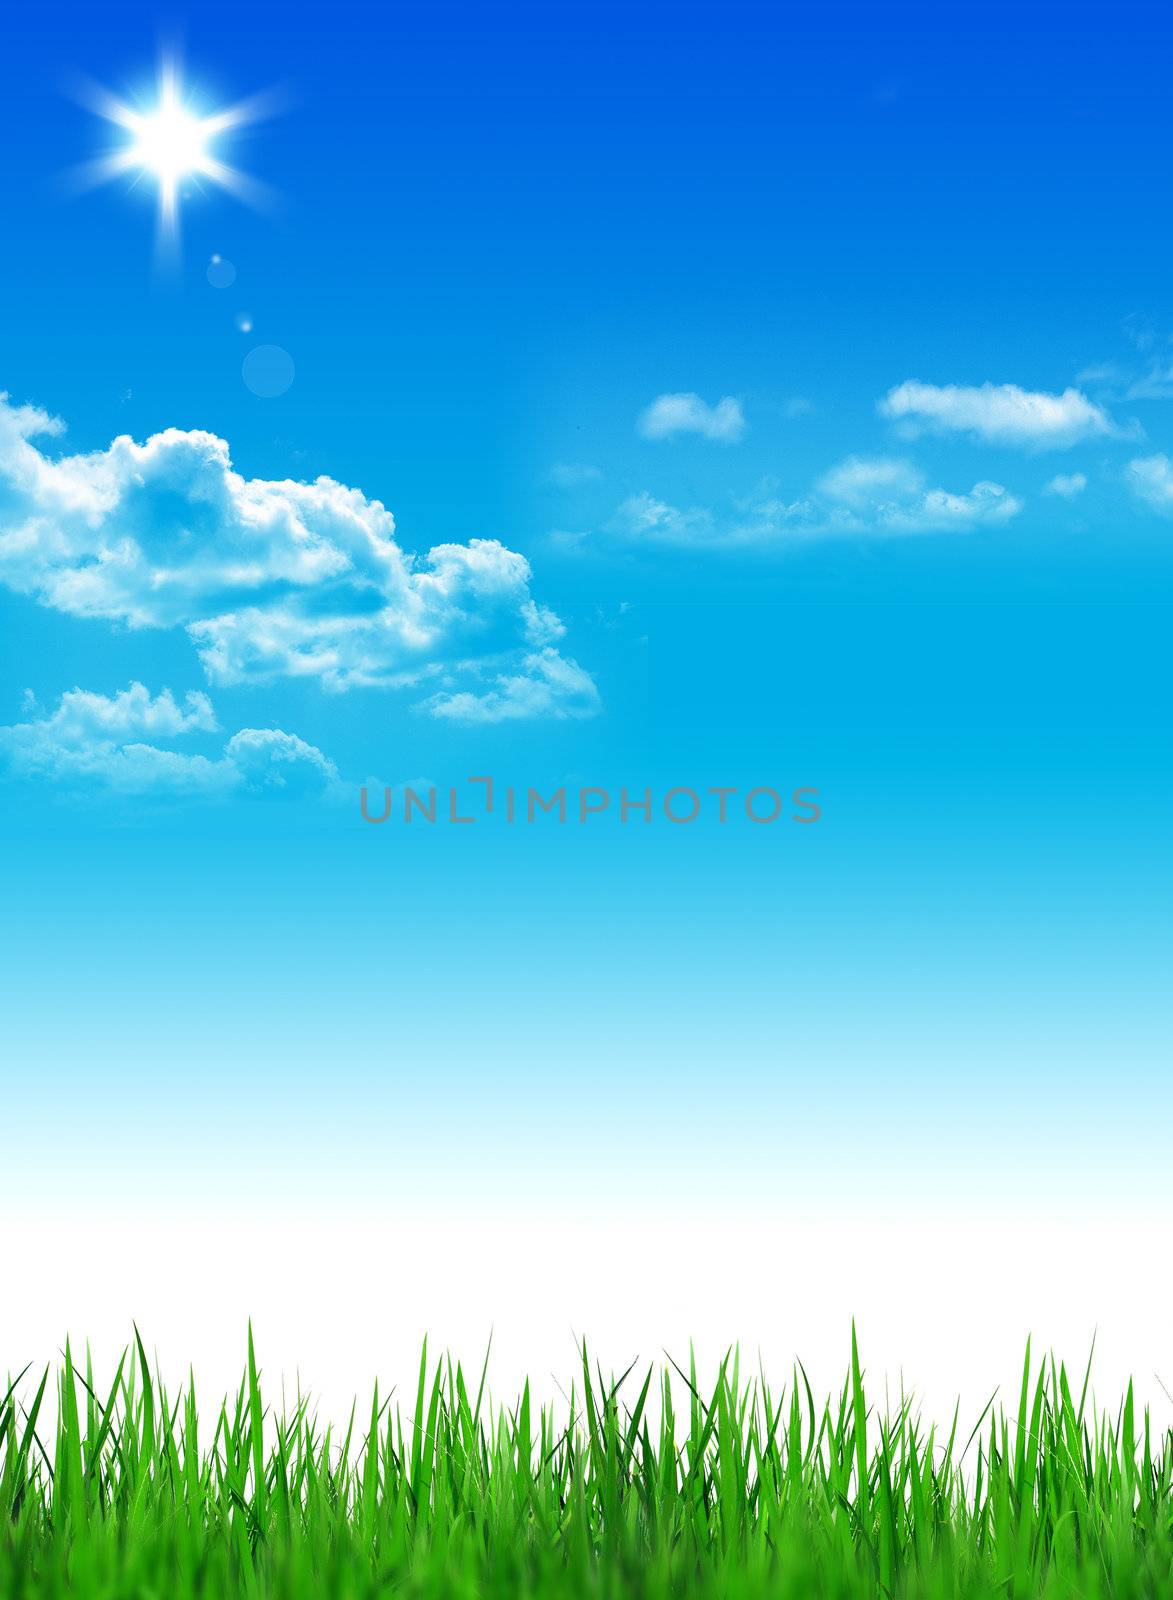 Green grass on the blue sky background